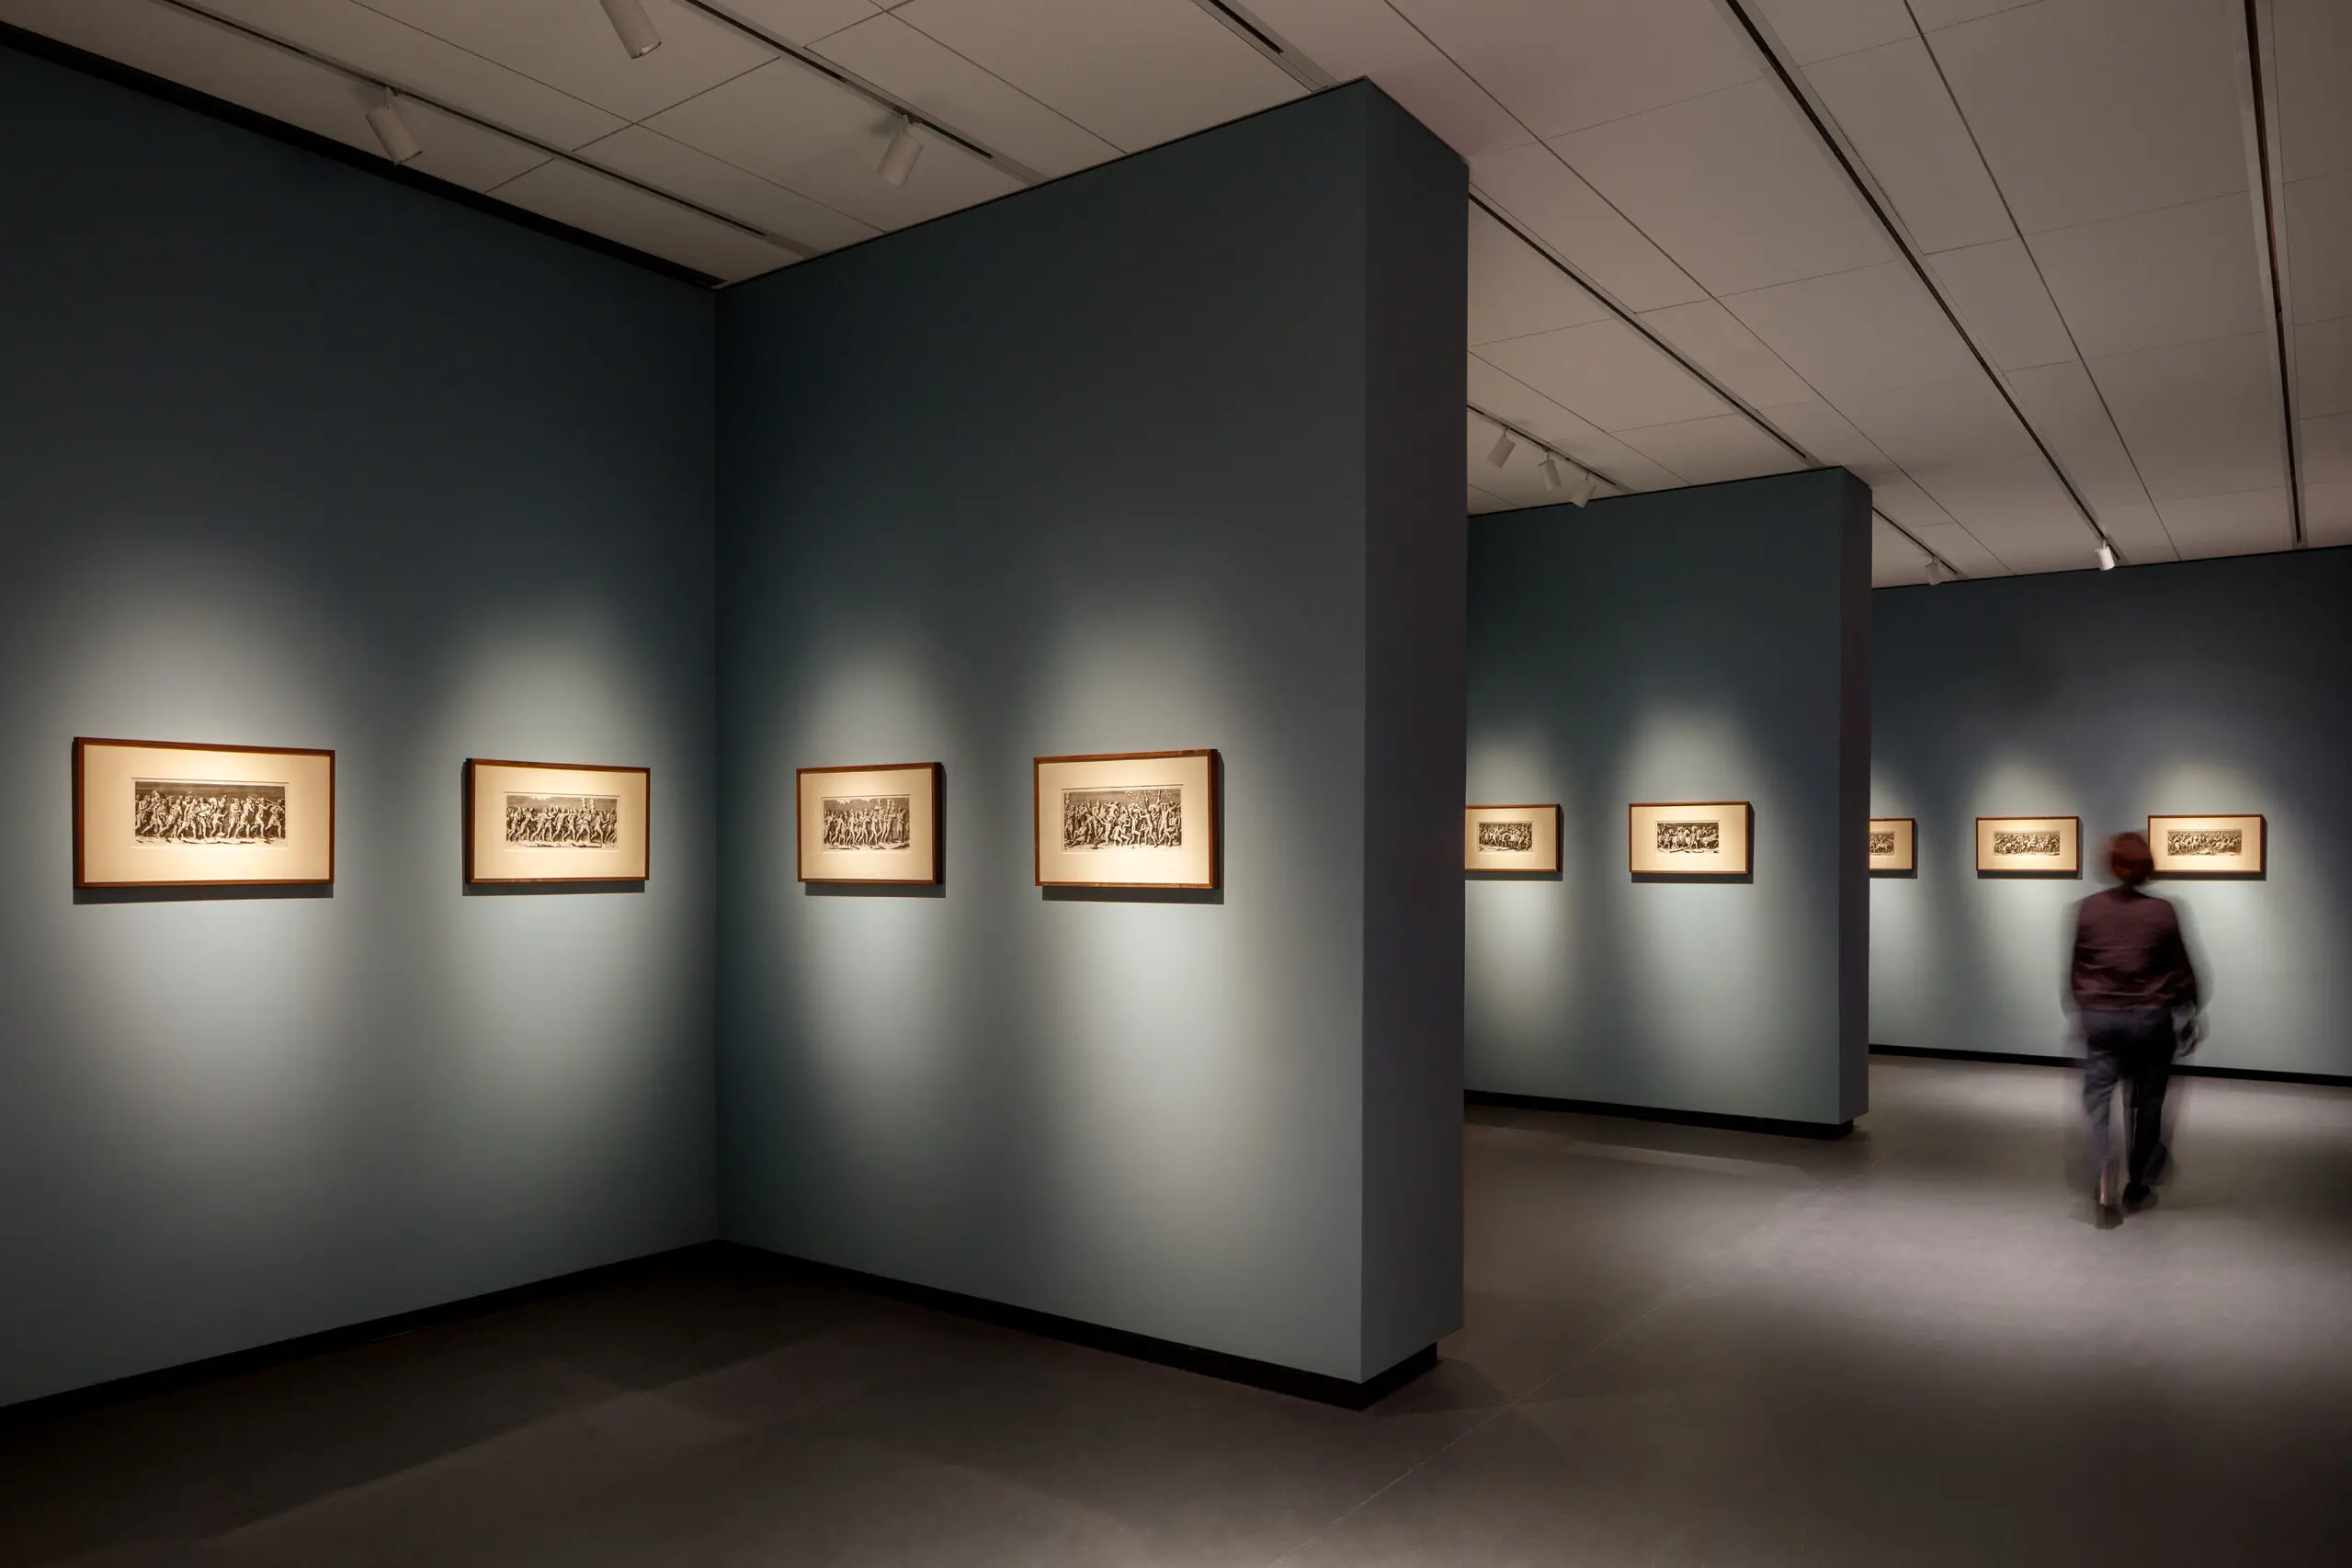 A modern museum gallery is photographed at a wide angle. It features several inset bays in which small framed prints are hung. A visitor walks through the galleries.